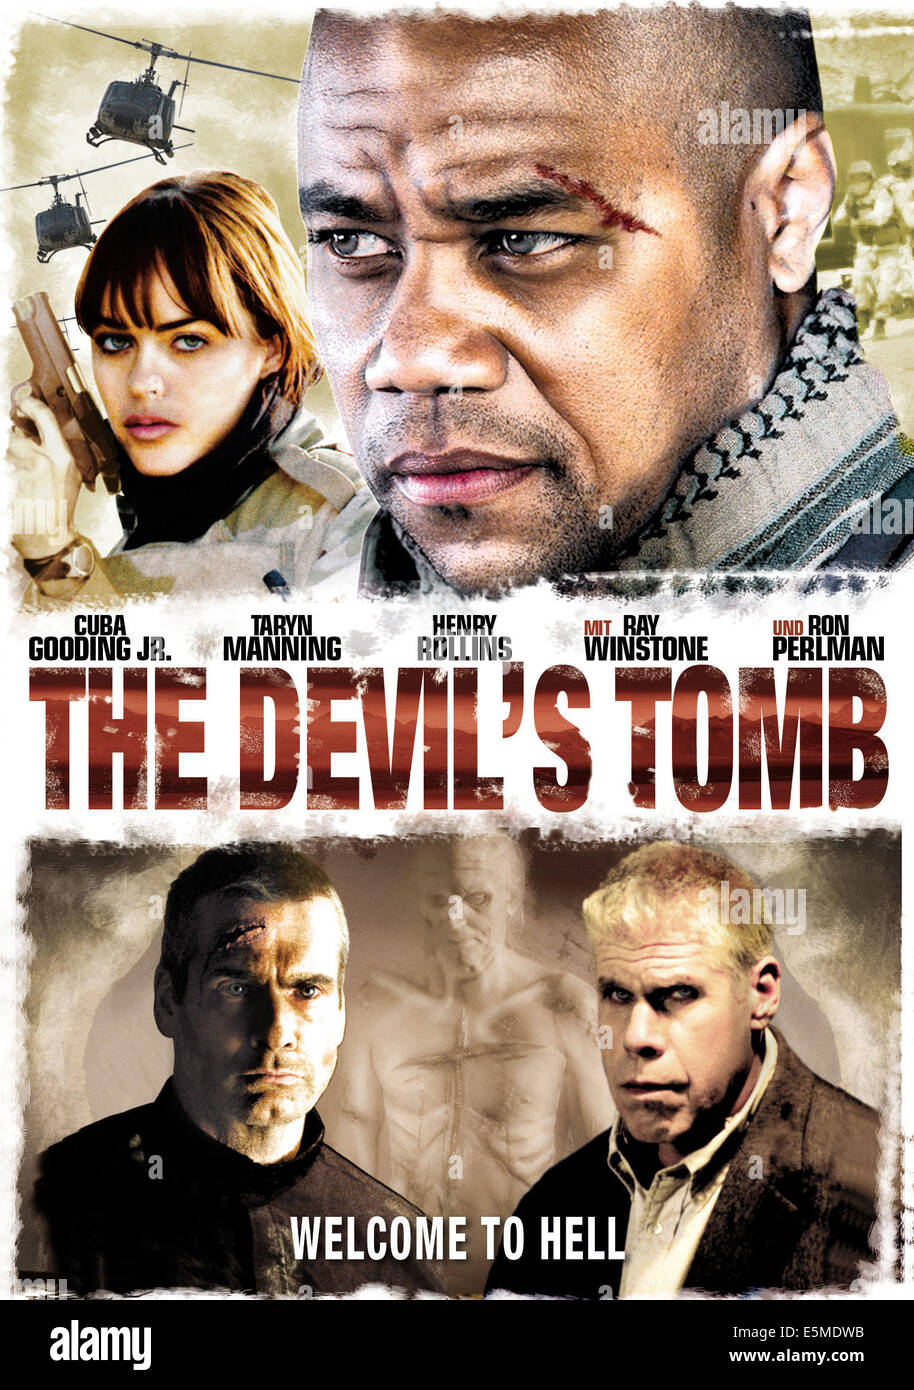 THE DEVIL'S TOMB, top, from left: Stephanie Jacobsen, Cuba Gooding Jr., bottom, from left: Henry Rollins, Ron Perlman, 2009. Stock Photo